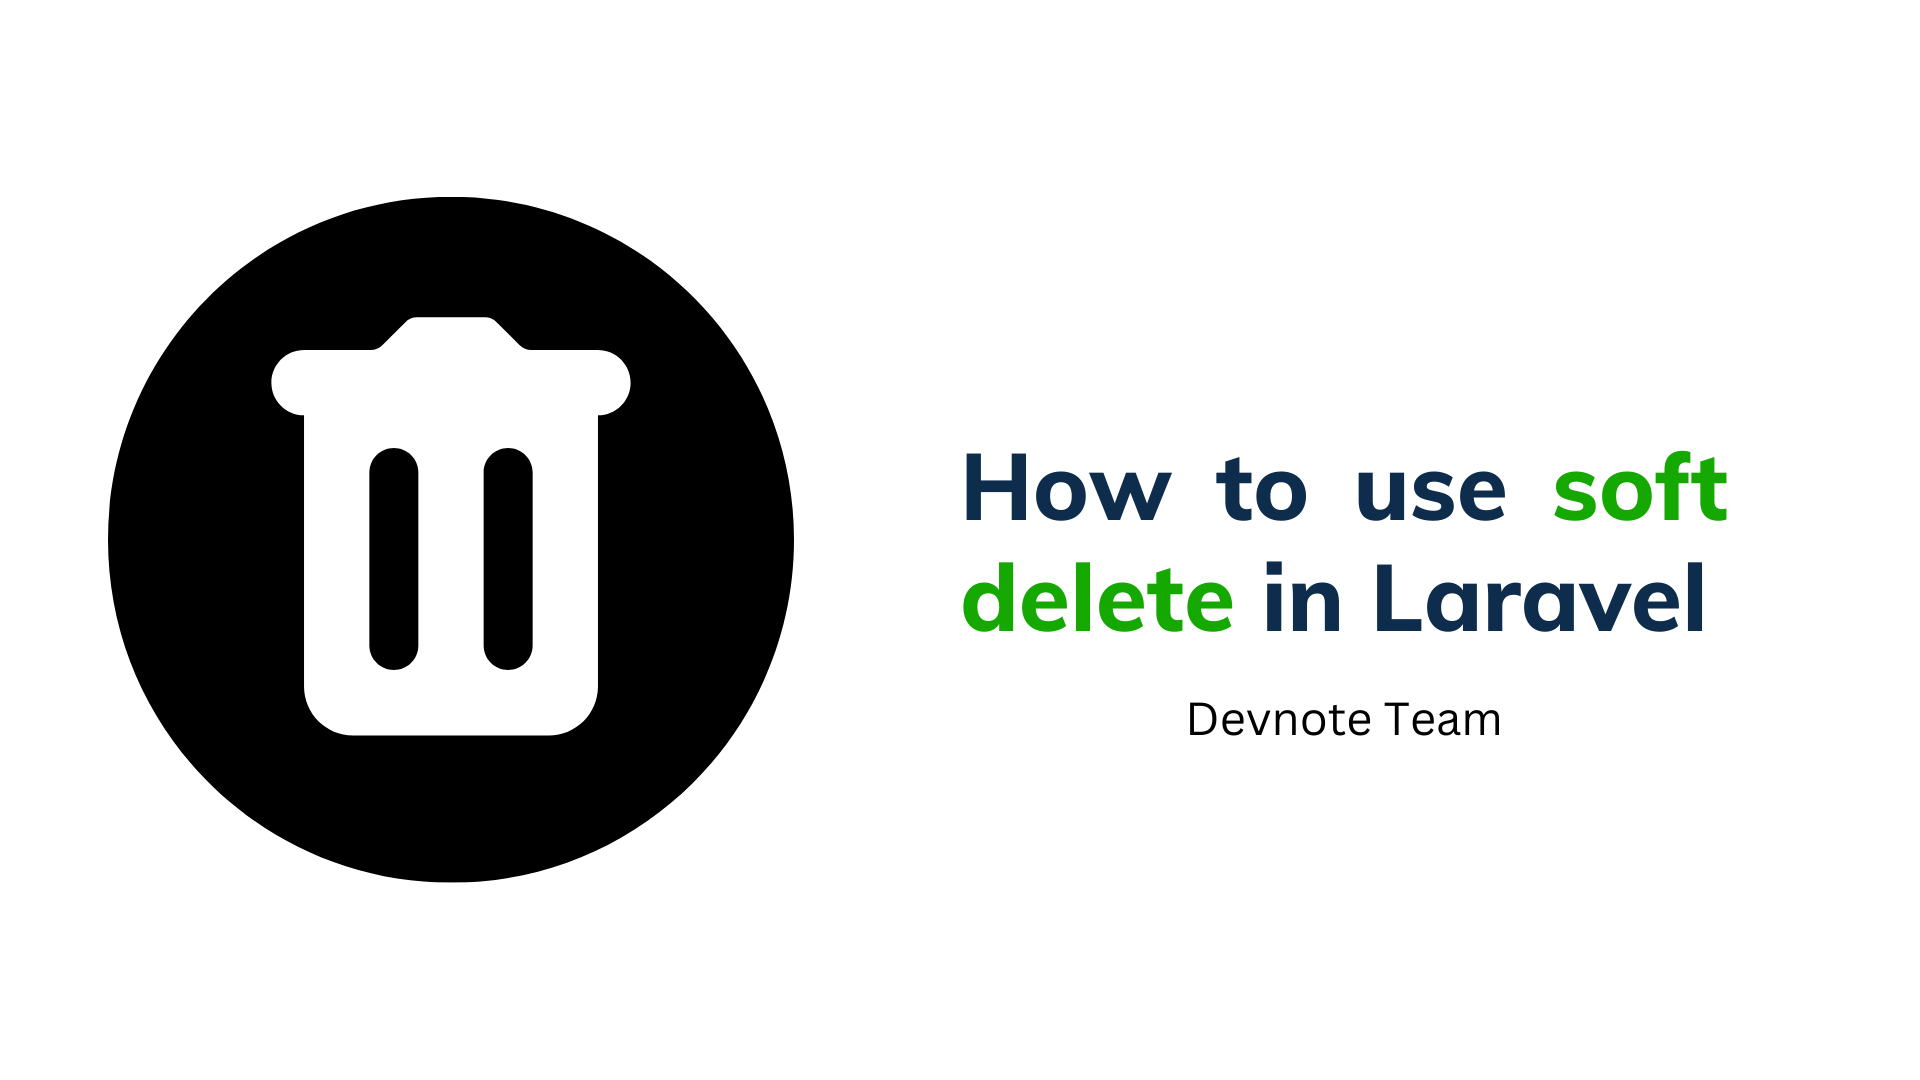 How to use soft delete in Laravel